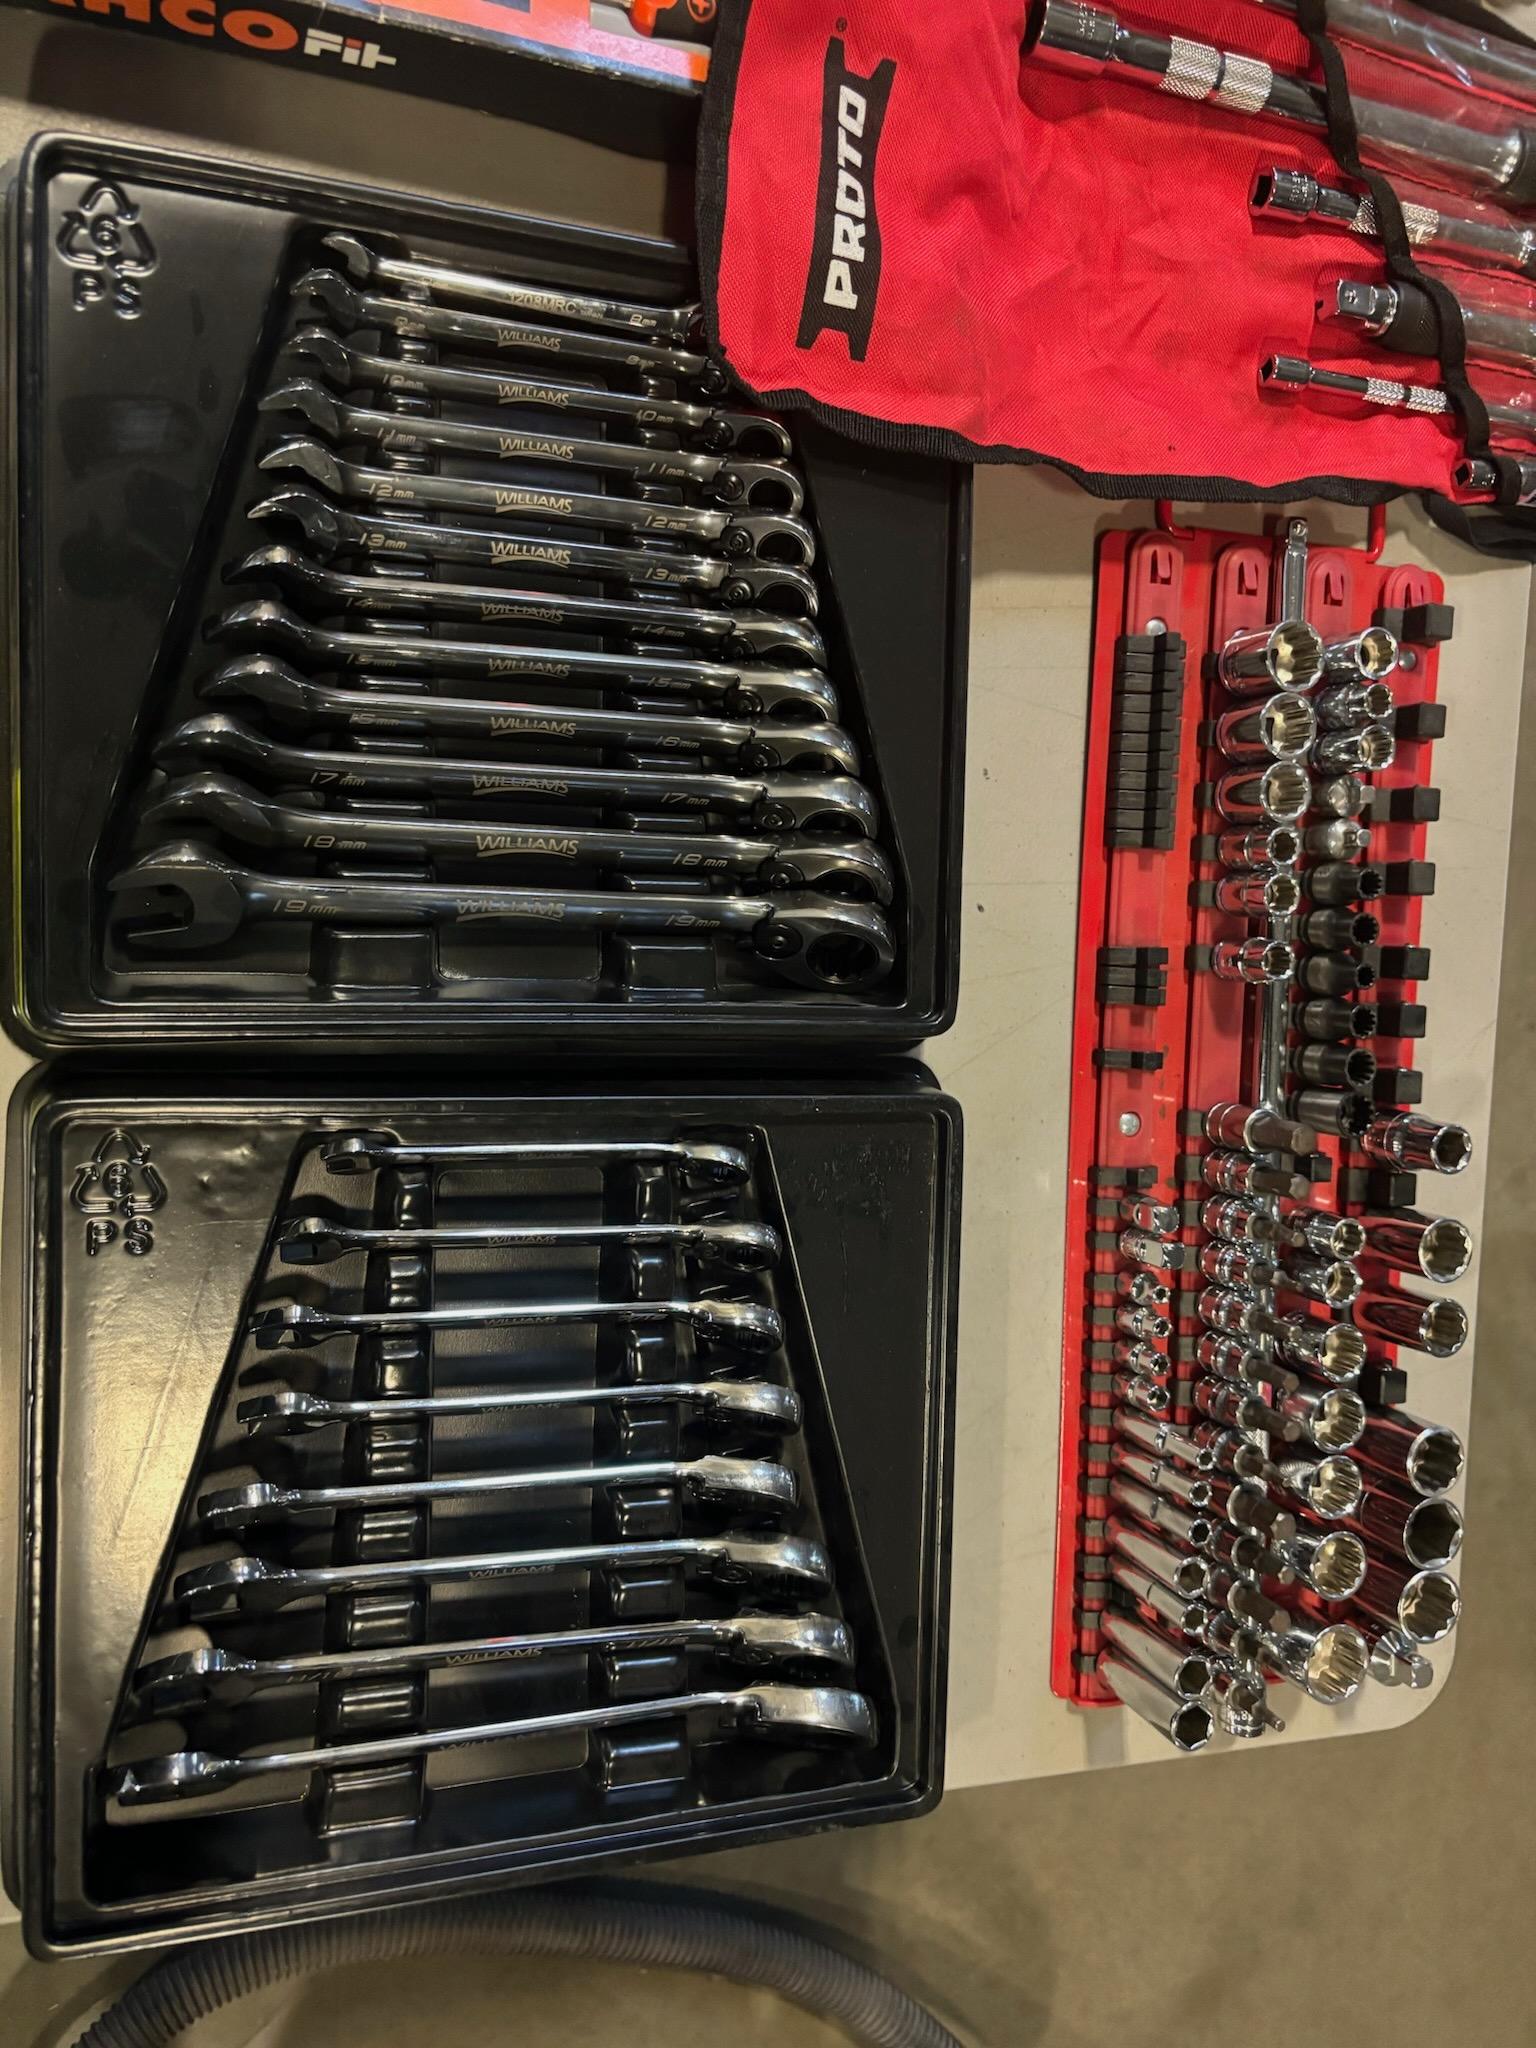 Sockets and Wrenches